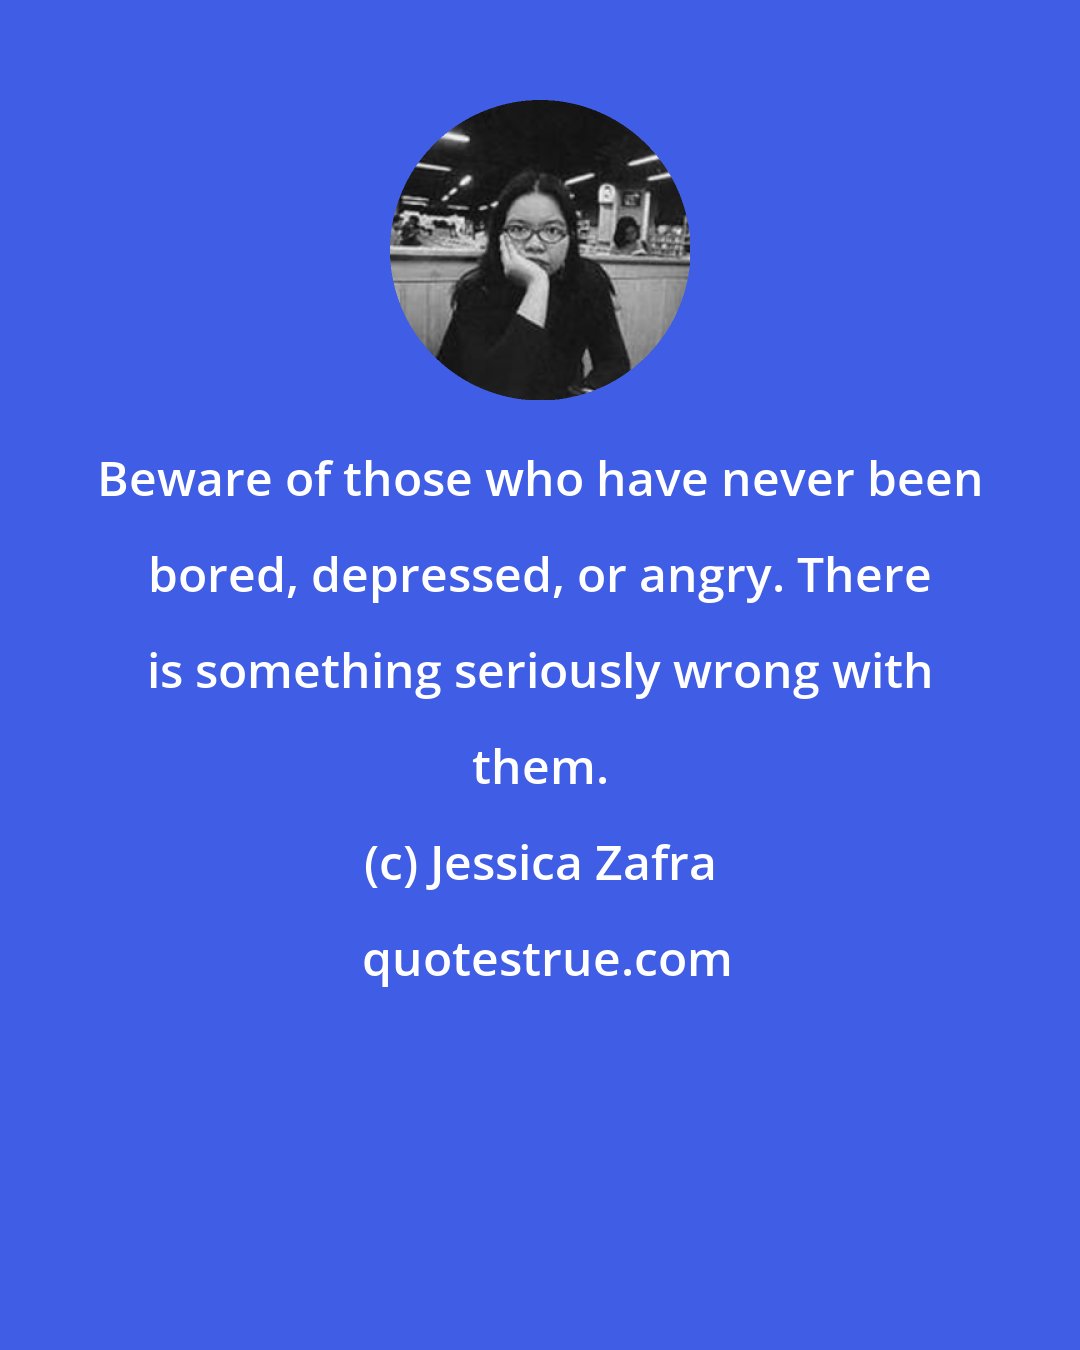 Jessica Zafra: Beware of those who have never been bored, depressed, or angry. There is something seriously wrong with them.